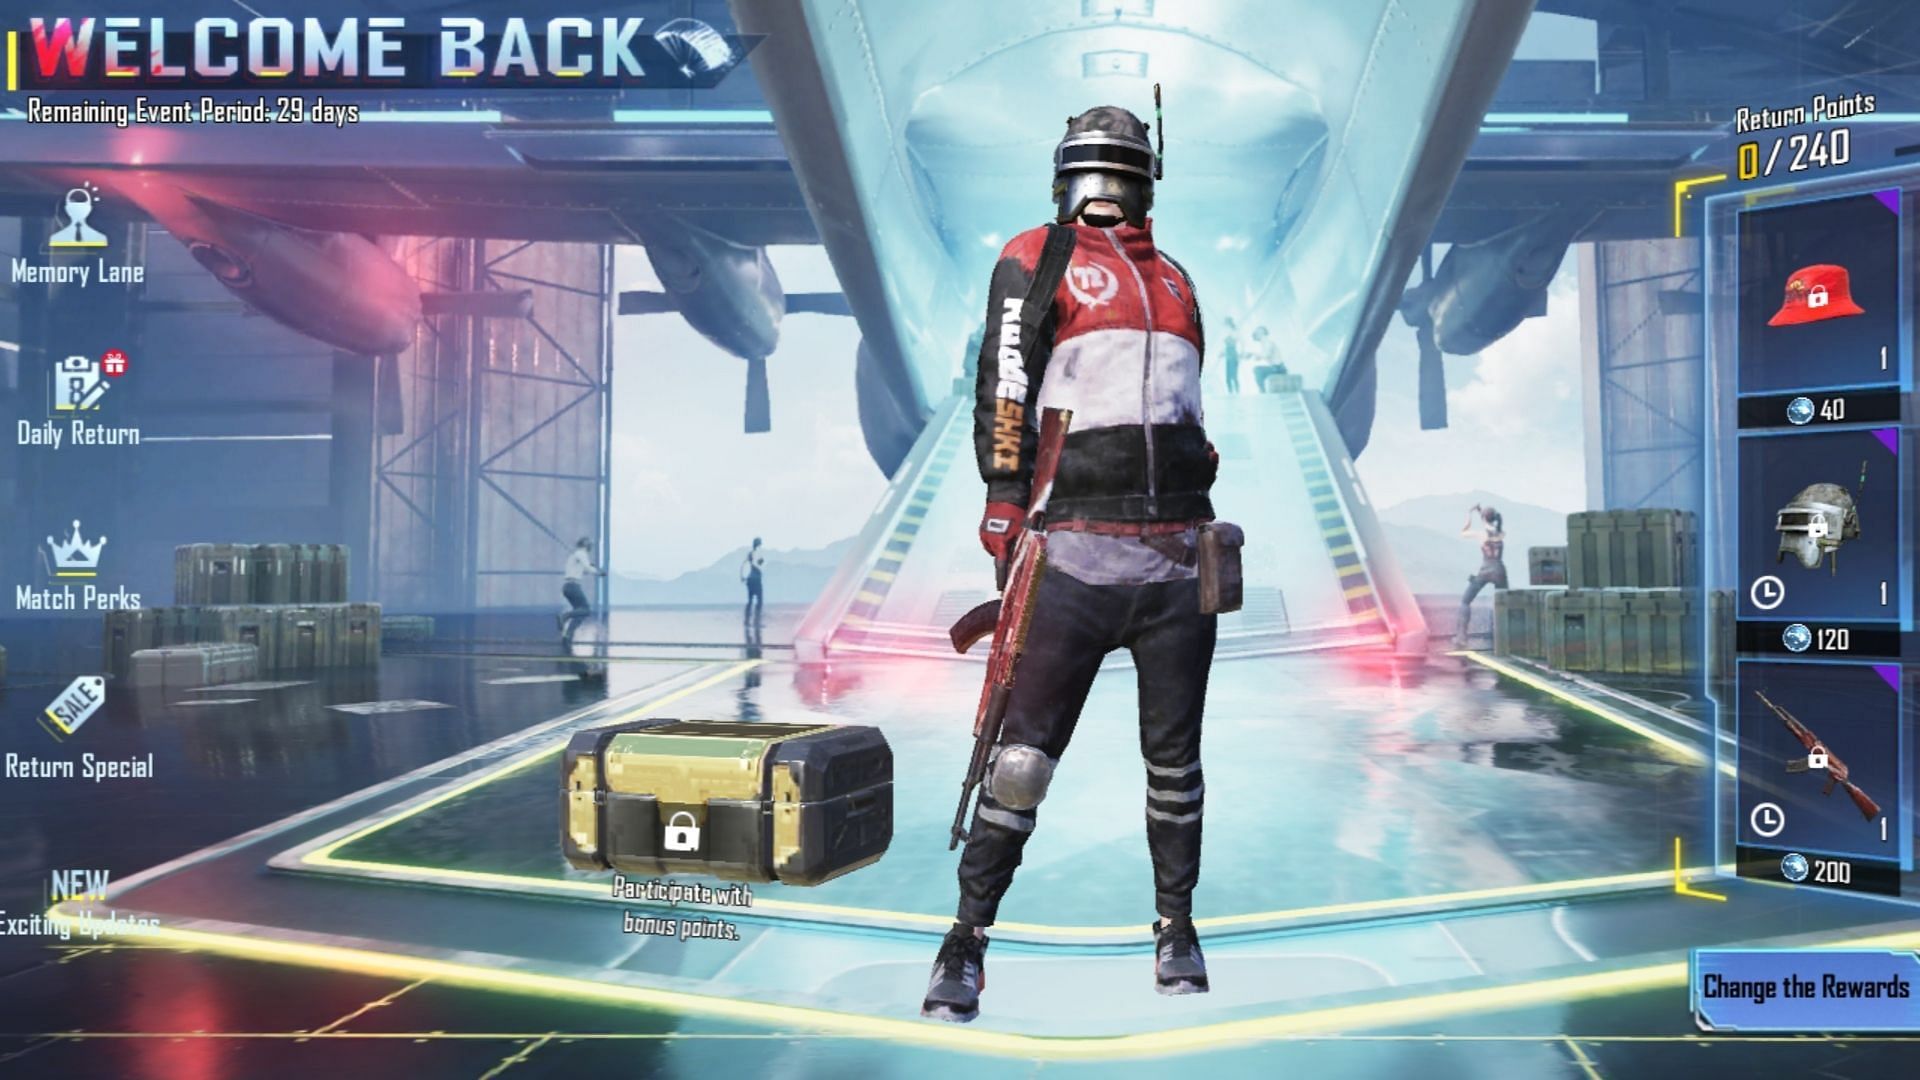 Welcome Back event was added to the game recently (Image via Krafton)